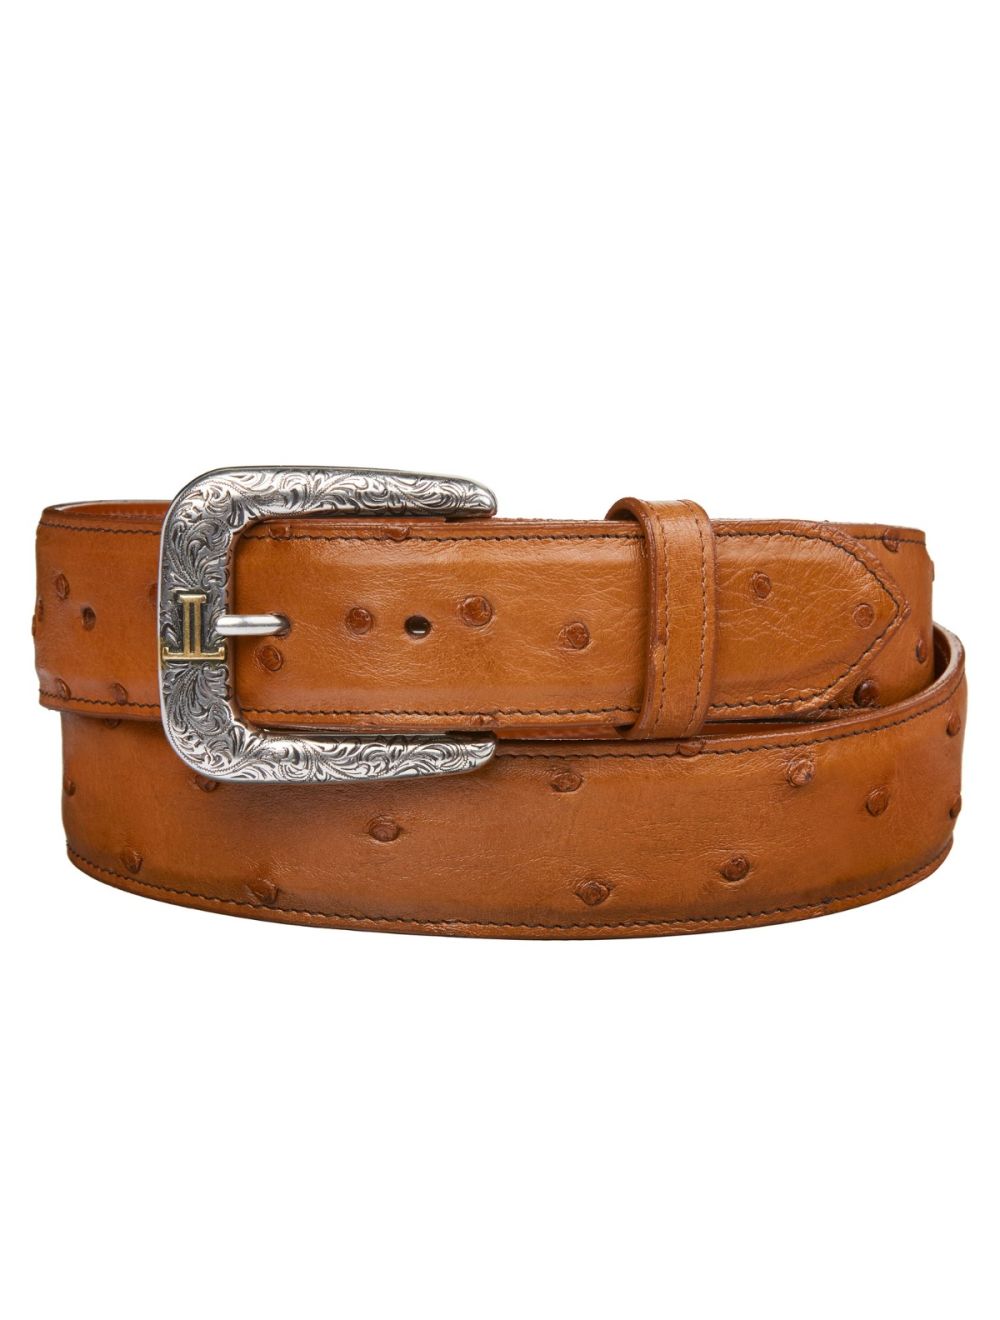 Lucchese Men's Full Quill Ostrich Leather Belt